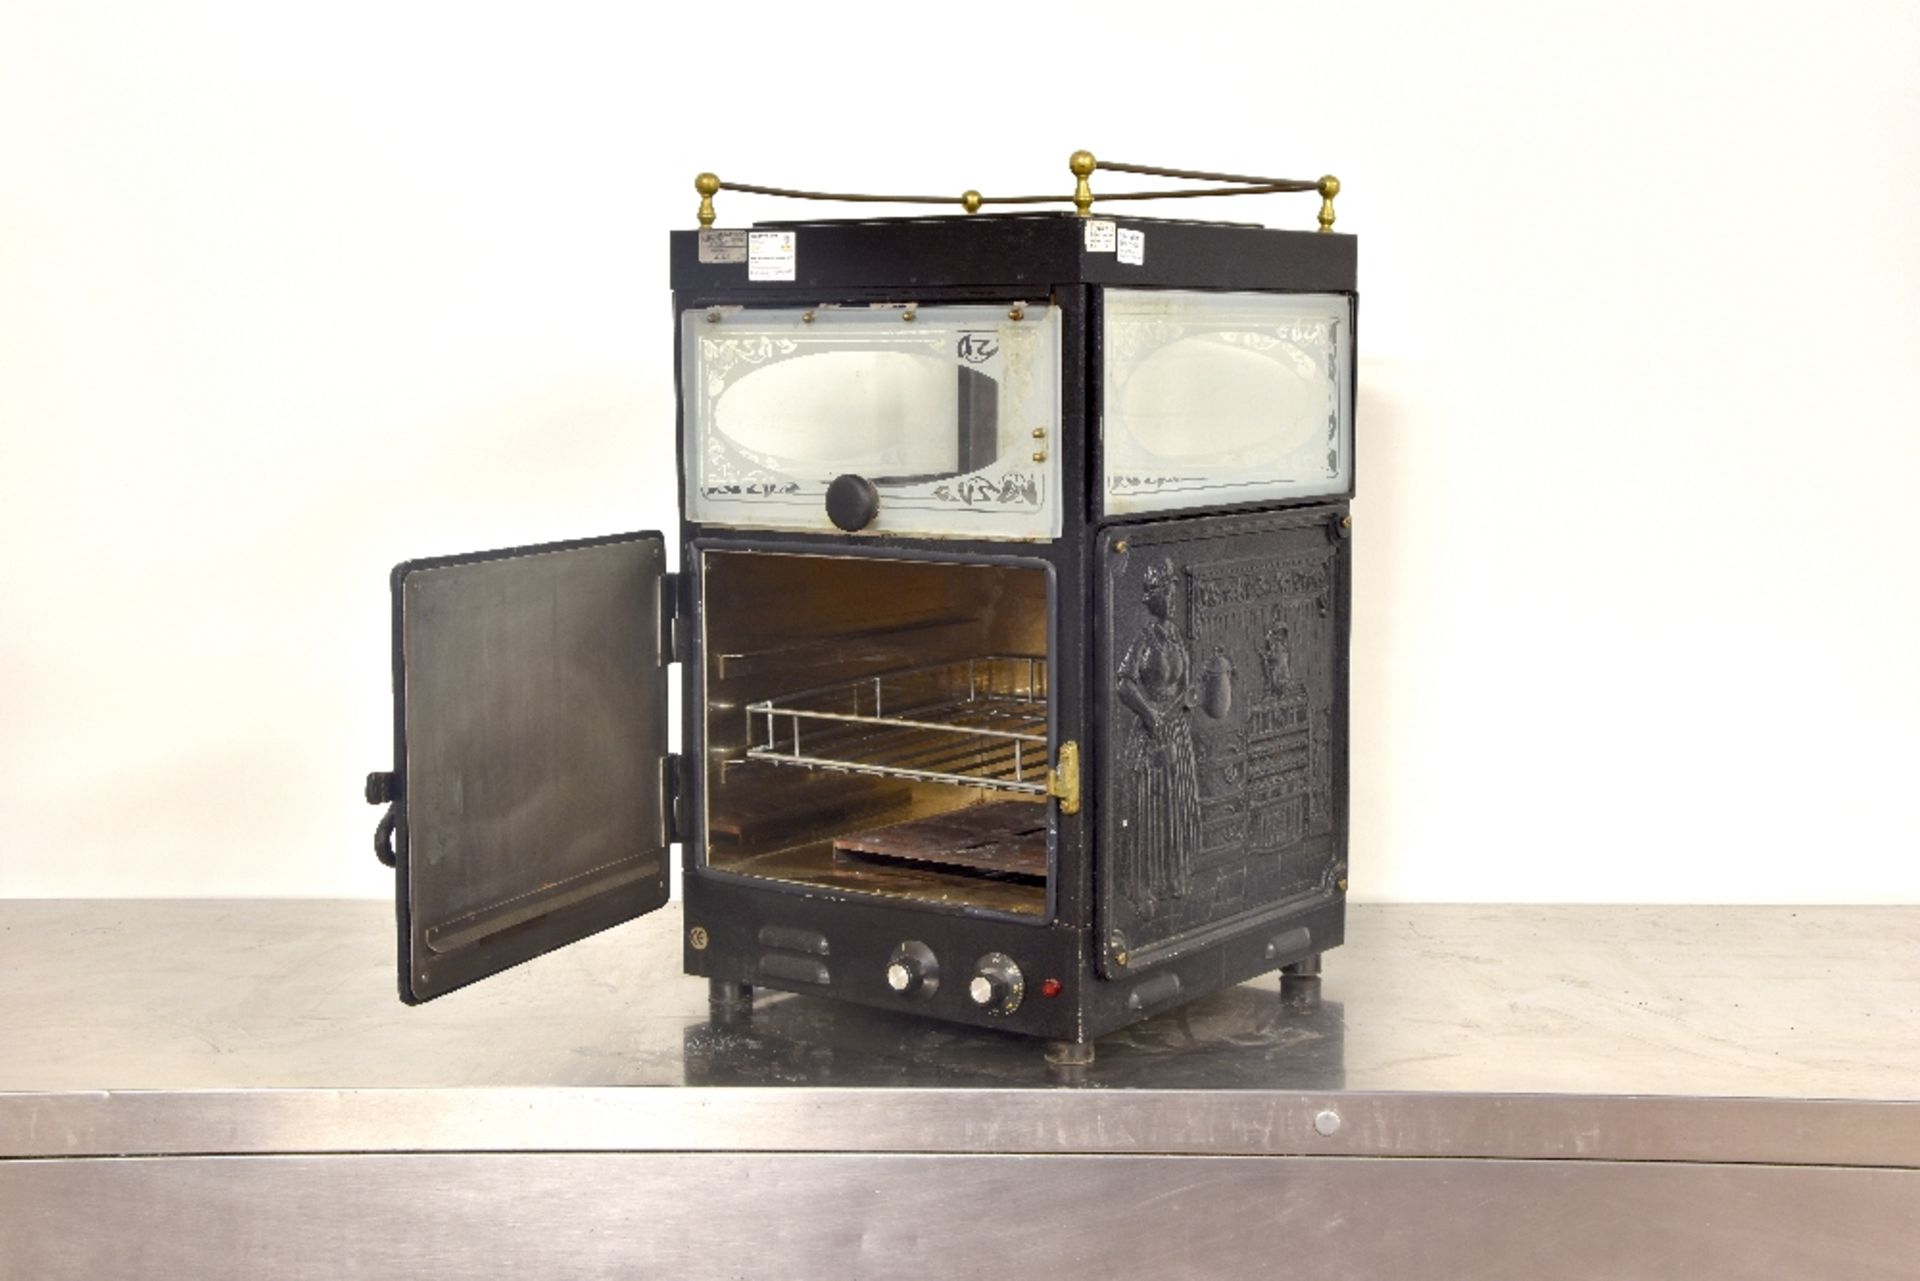 Queen Victoria Baked Potato Oven – with Hot Holding Cabinet -1ph - Tested Working